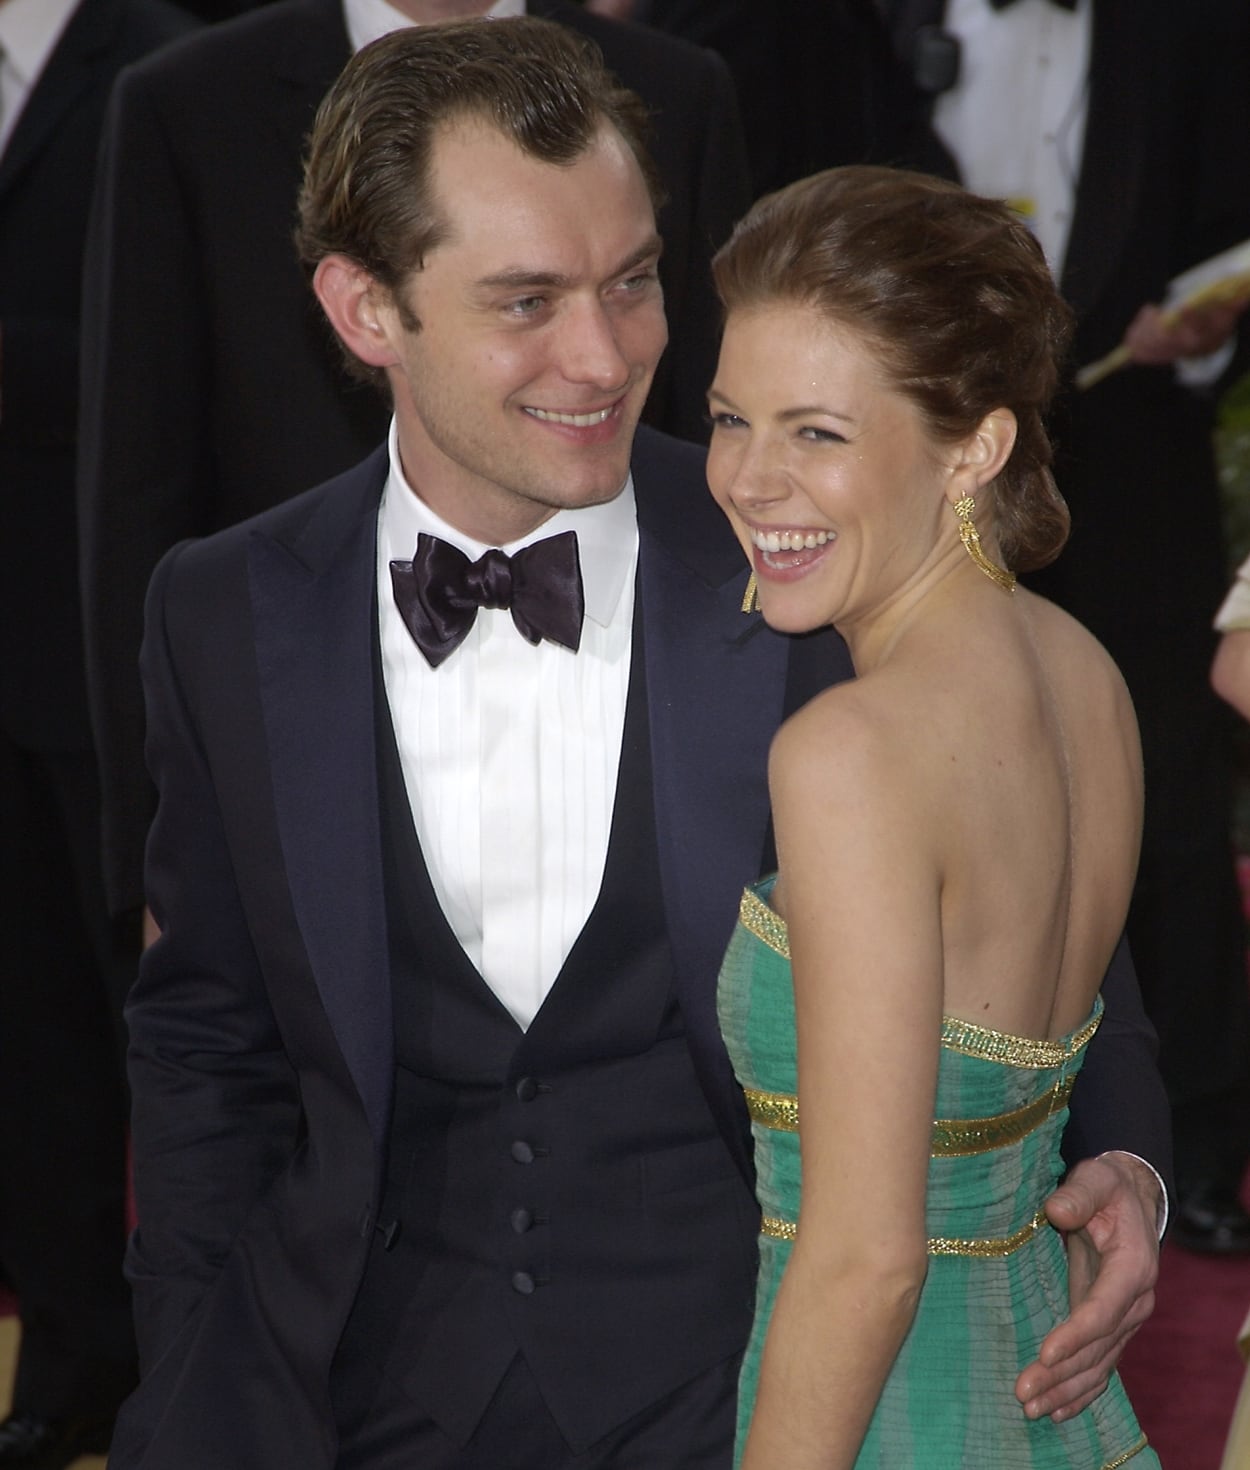 Jude Law and Sienna Miller met on the set of their film Alfie in 2003 and were engaged a year later